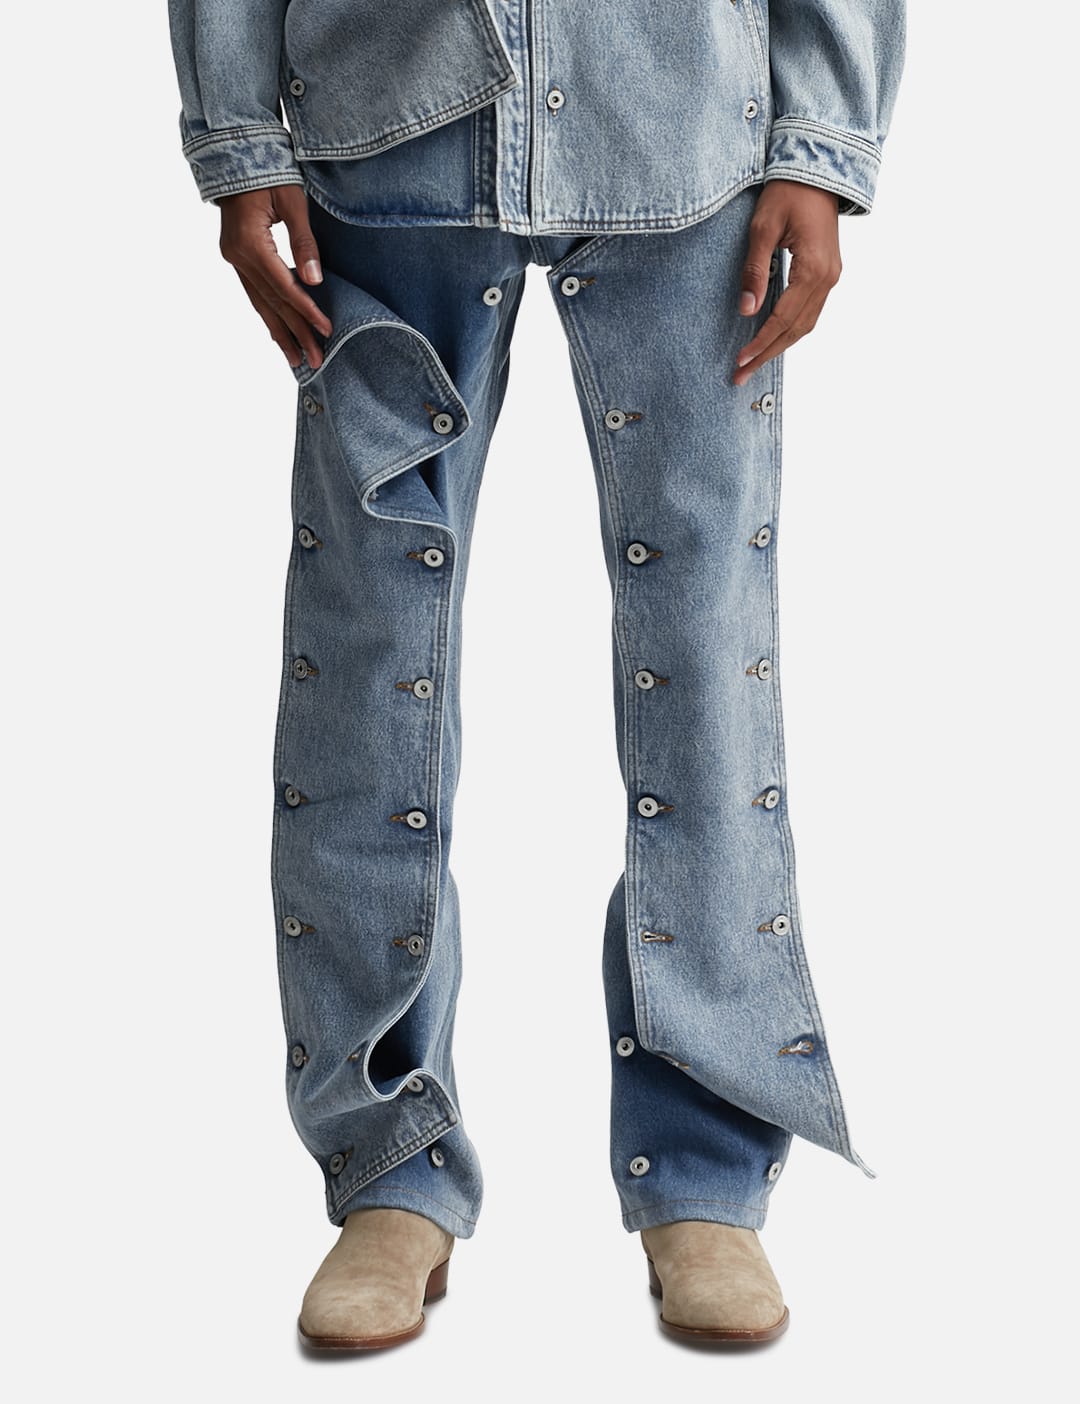 Y/PROJECT - SNAP OFF JEANS | HBX - Globally Curated Fashion and